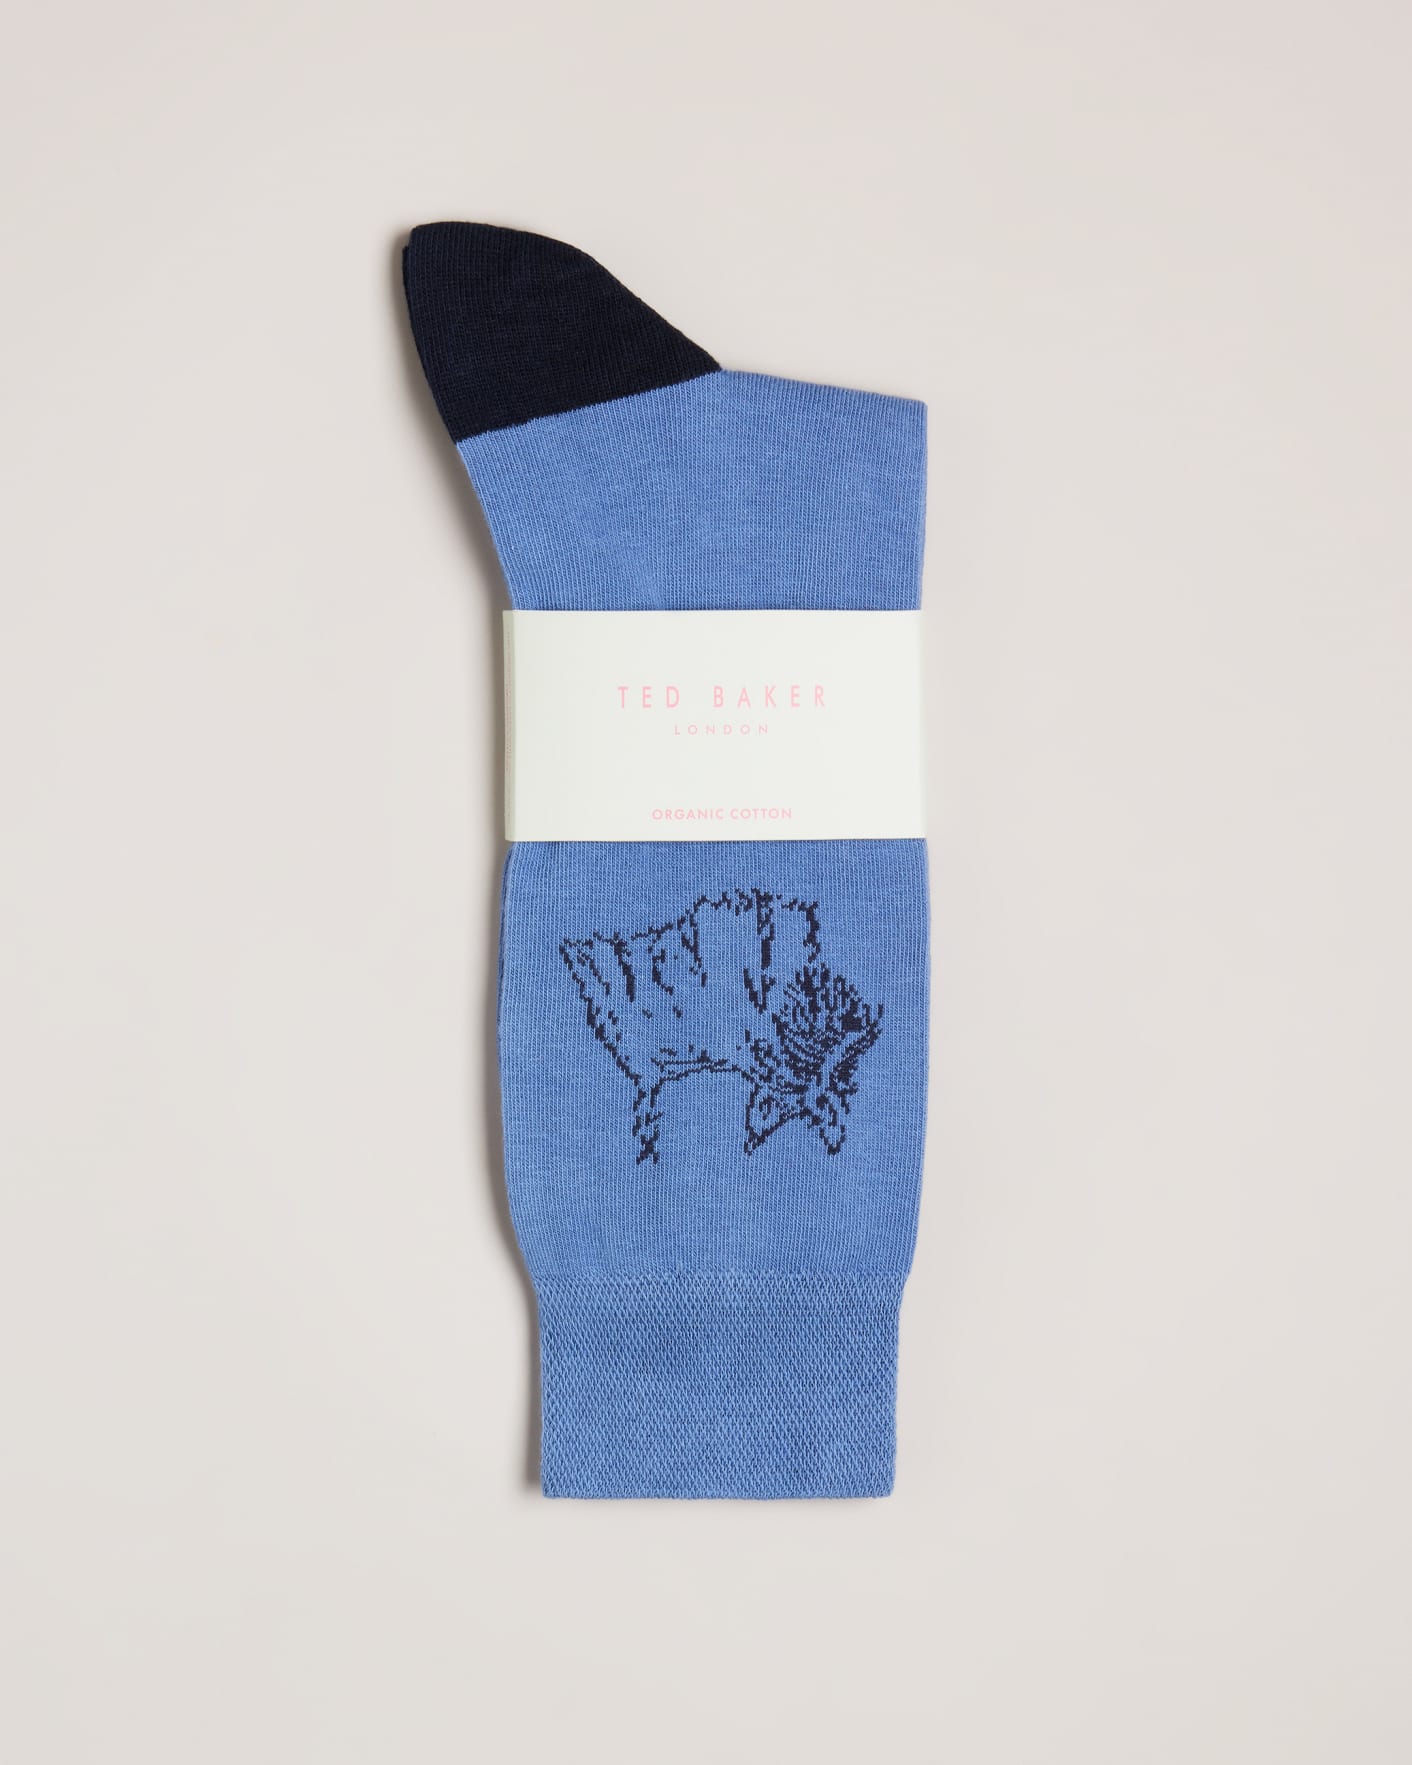 Ted Baker Men's Dogsock Sock with Dog Placement, Blue, One Size